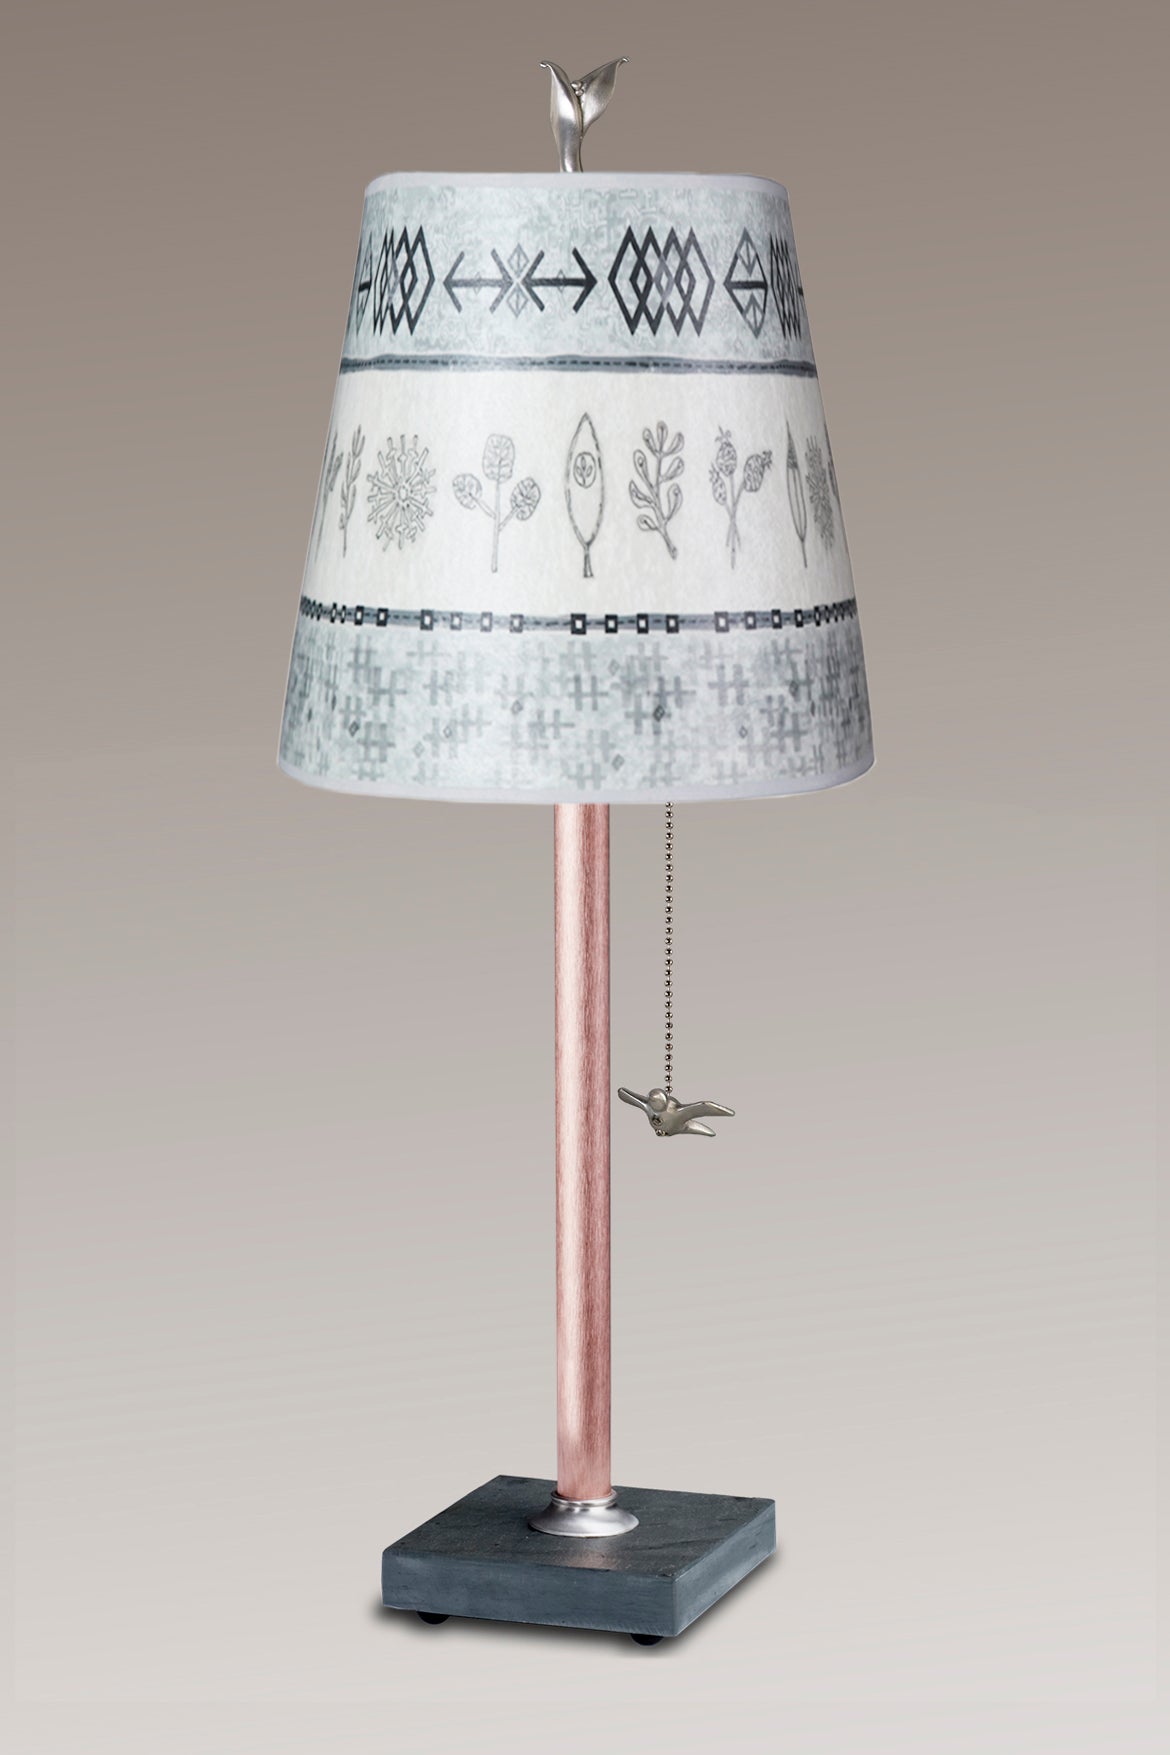 Janna Ugone &amp; Co Table Lamps Copper Table Lamp with Small Drum in Woven &amp; Sprig in Mist